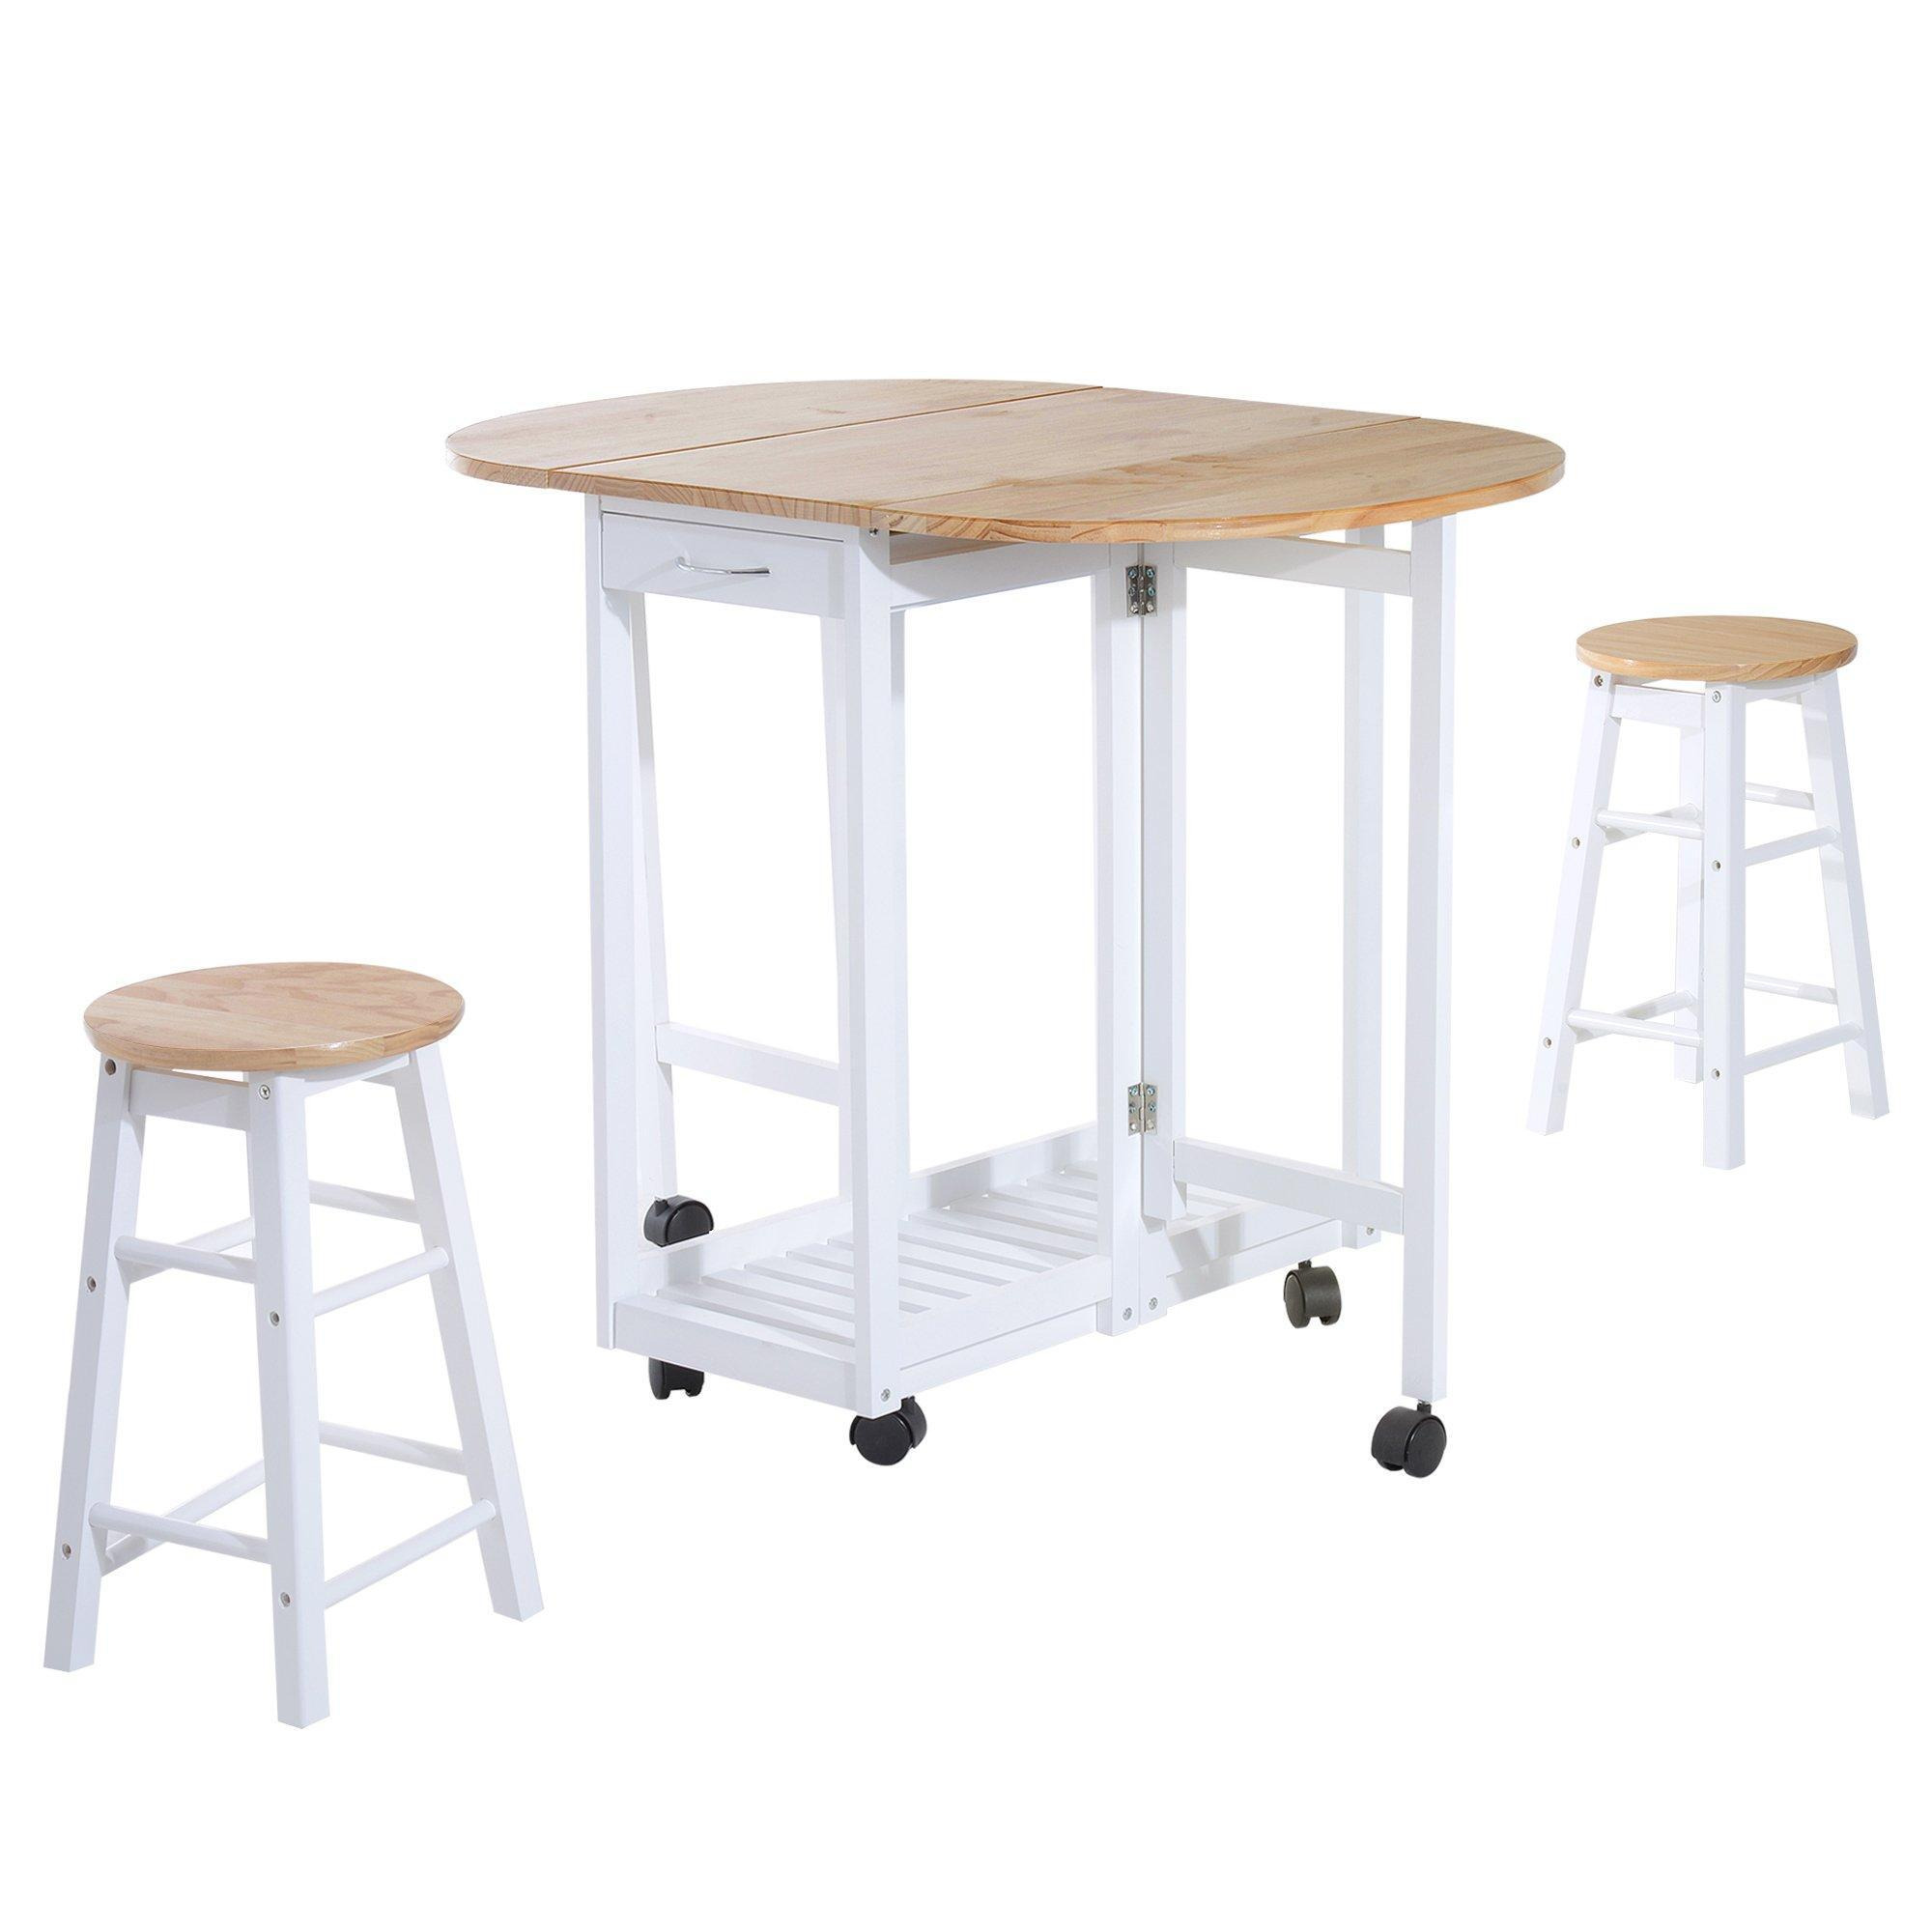 3pc Wooden Kitchen Cart Mobile Rolling Trolley Folding Stools Wheels - image 1